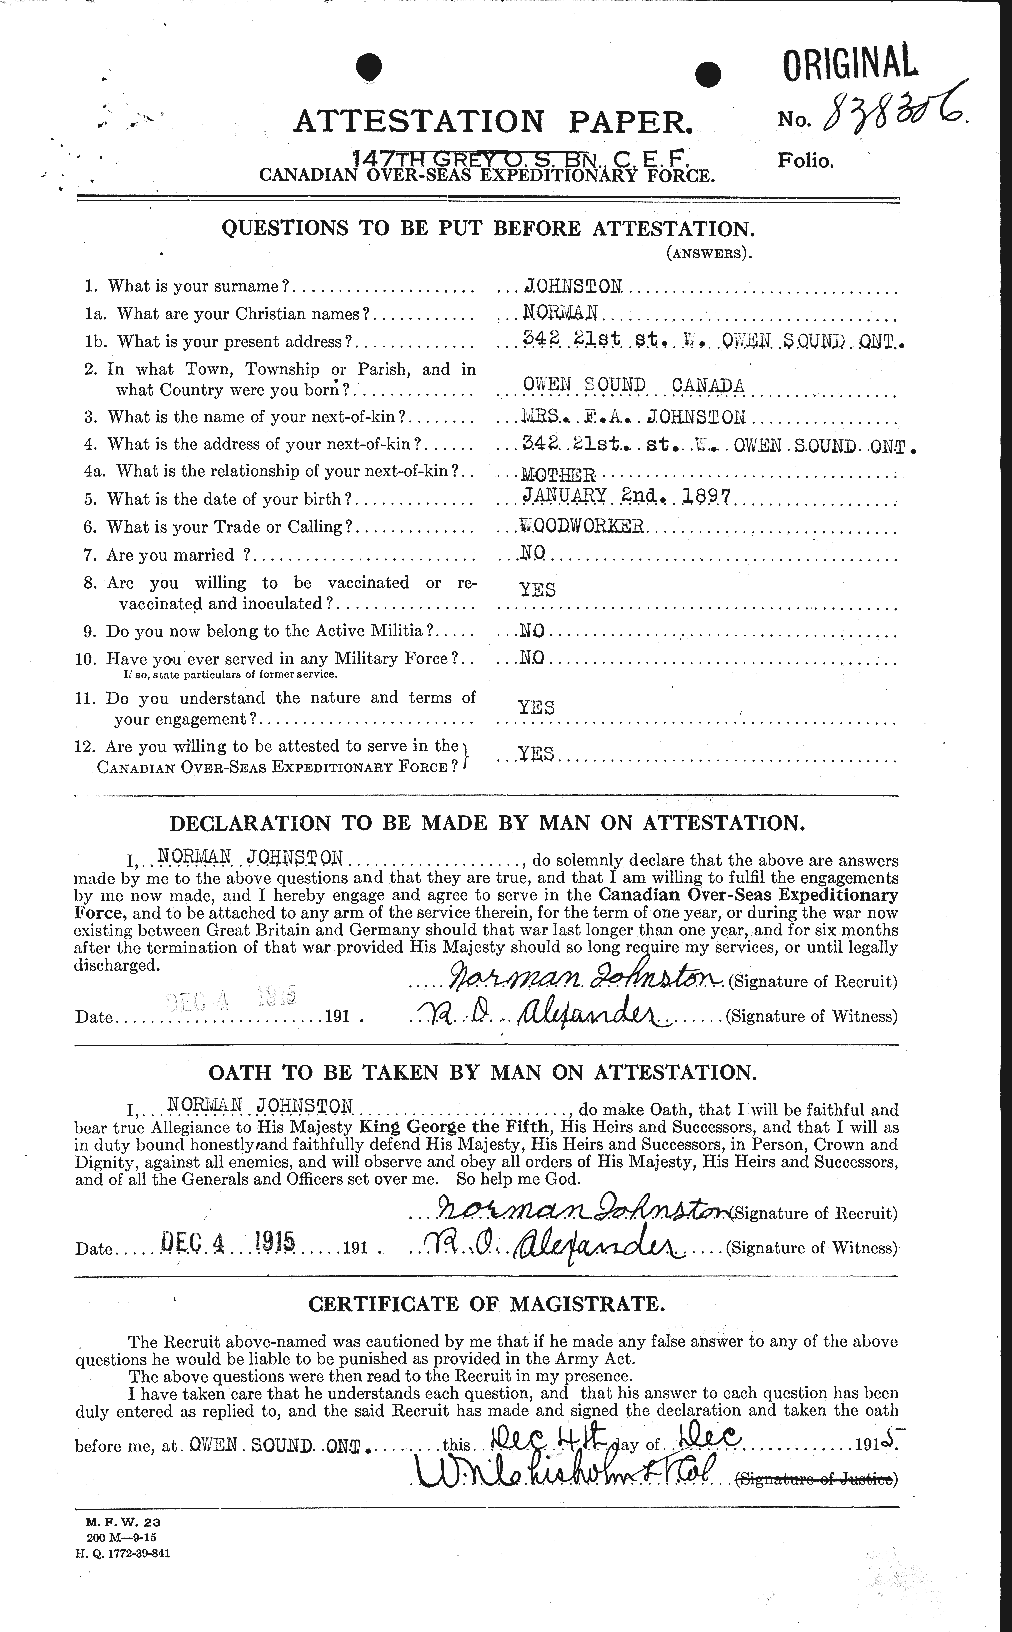 Personnel Records of the First World War - CEF 423066a